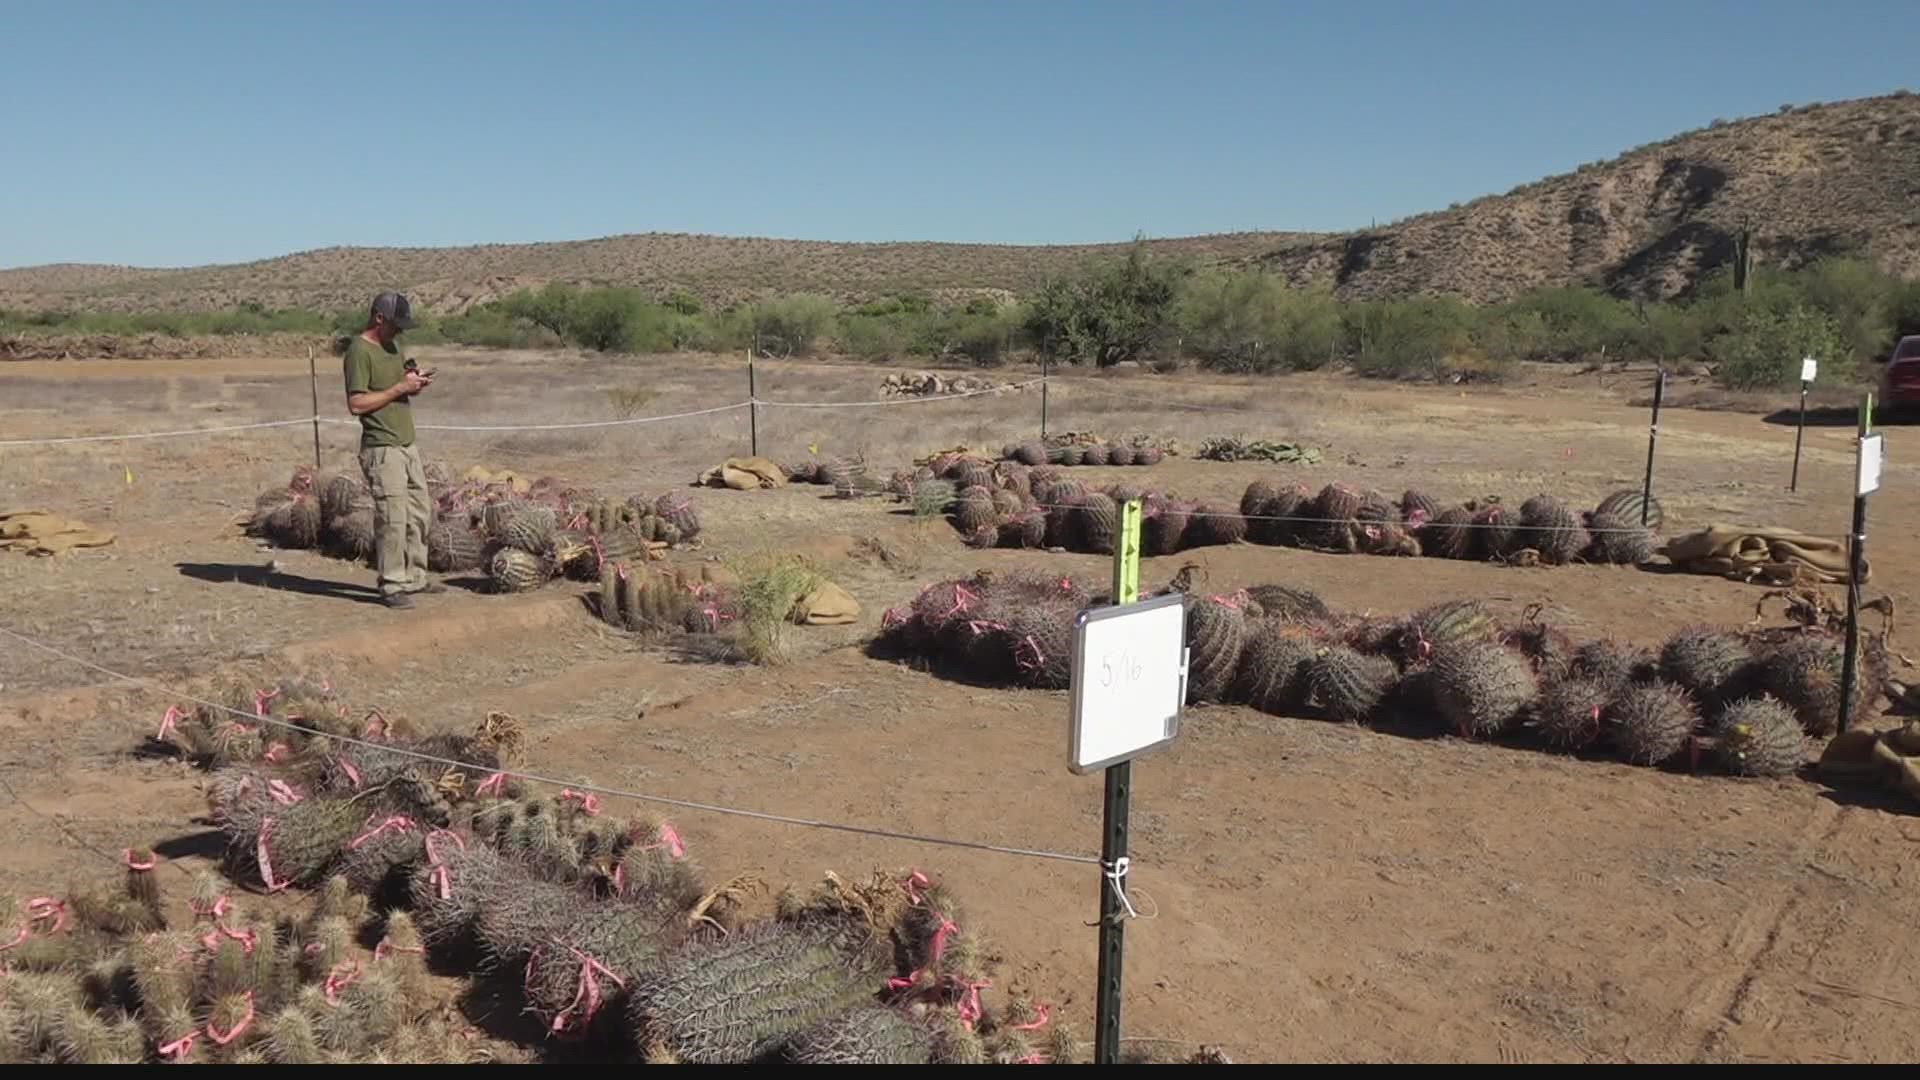 Thanks to a donation from the Arizona Lottery, conservationists have a saguaro rescue nursery to try and rehabilitate the saguaros that burn in wildfires.